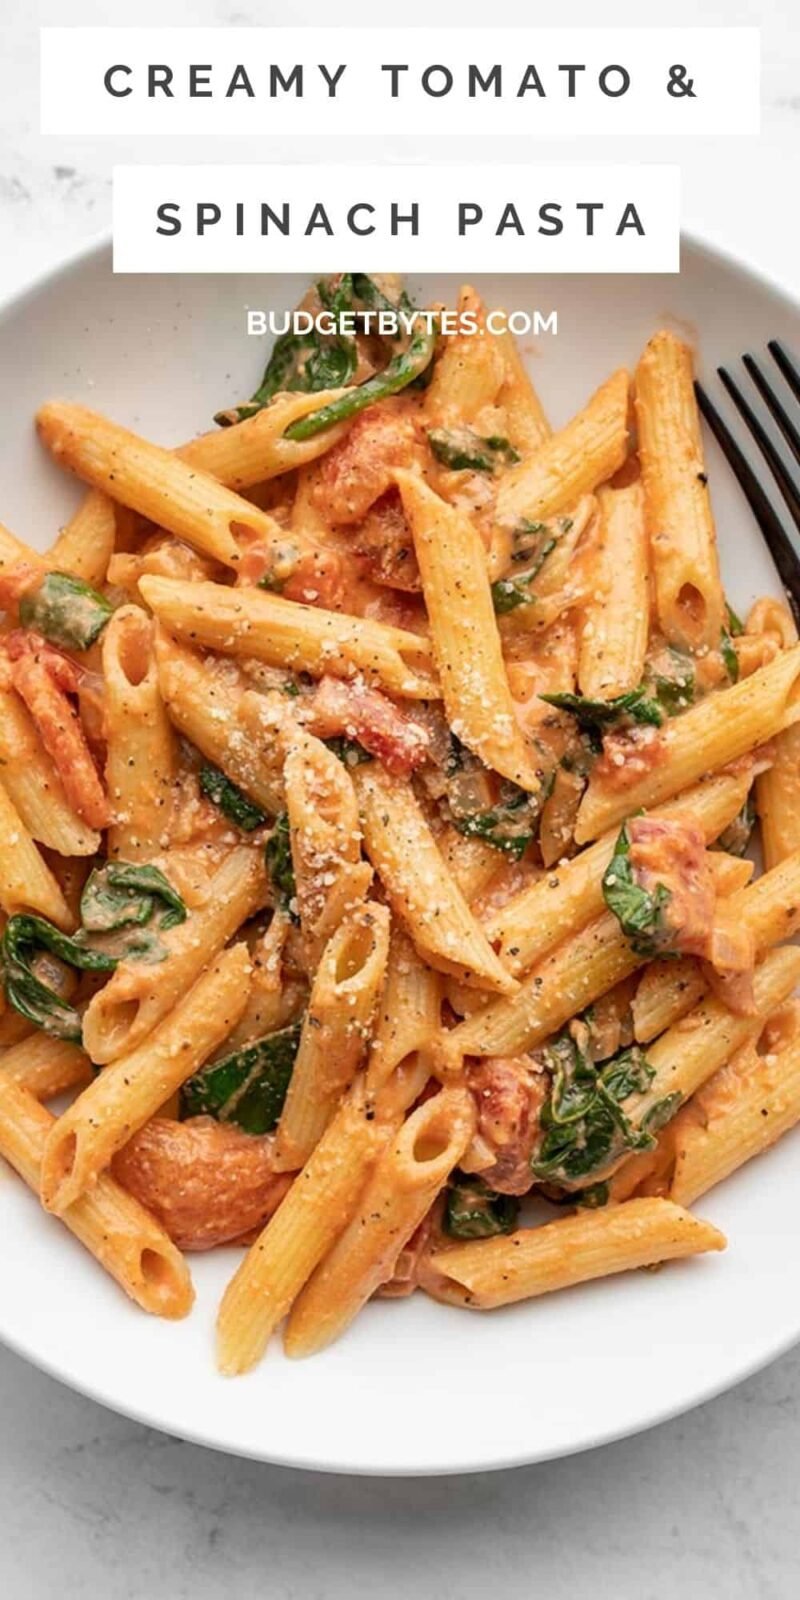 creamy tomato pasta in a bowl, title text at the top